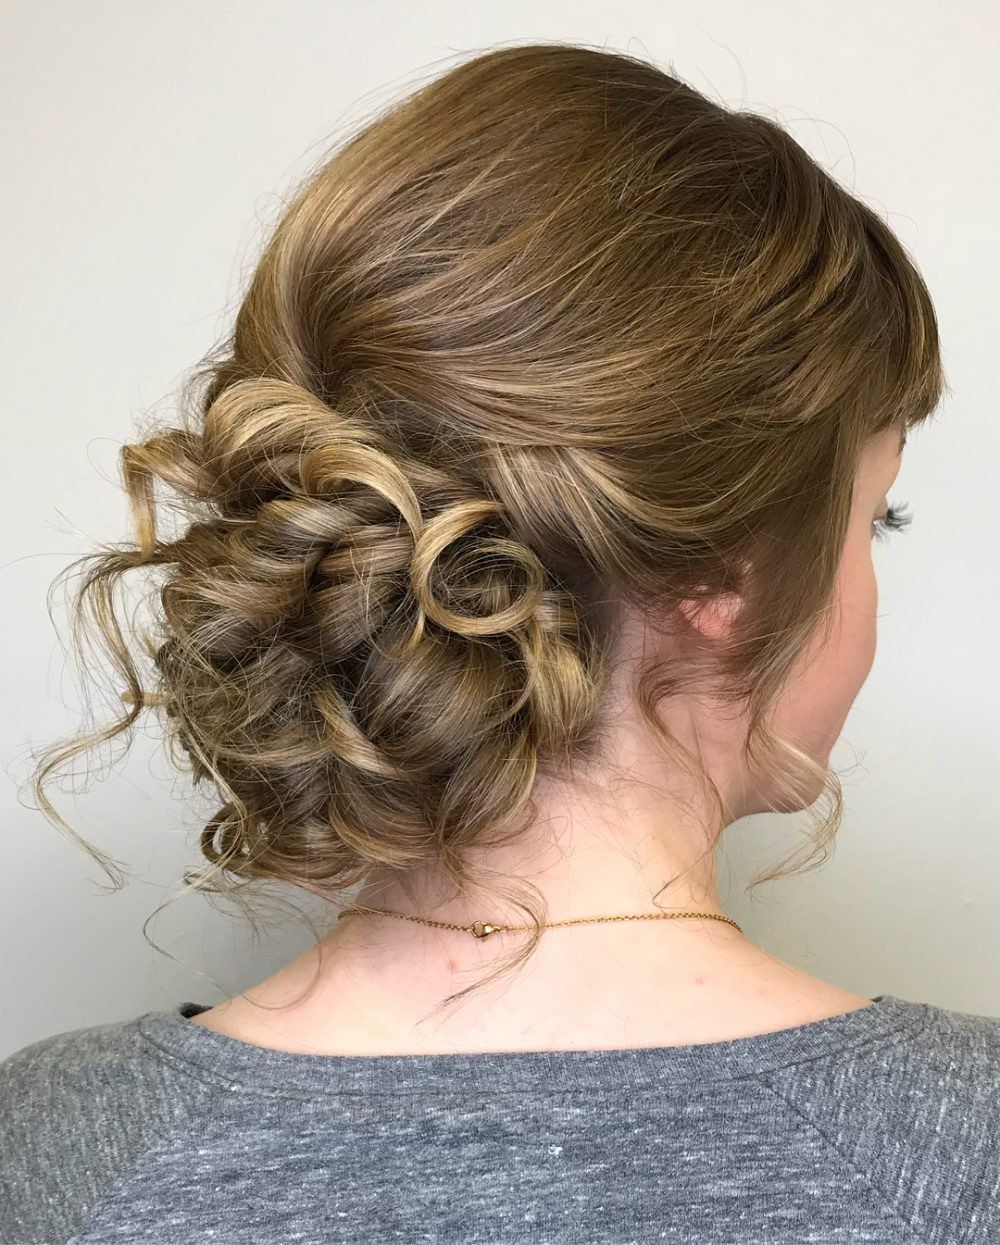 Cute Hairstyles For Prom
 23 Cute Prom Hairstyles for 2020 Updos Braids Half Ups